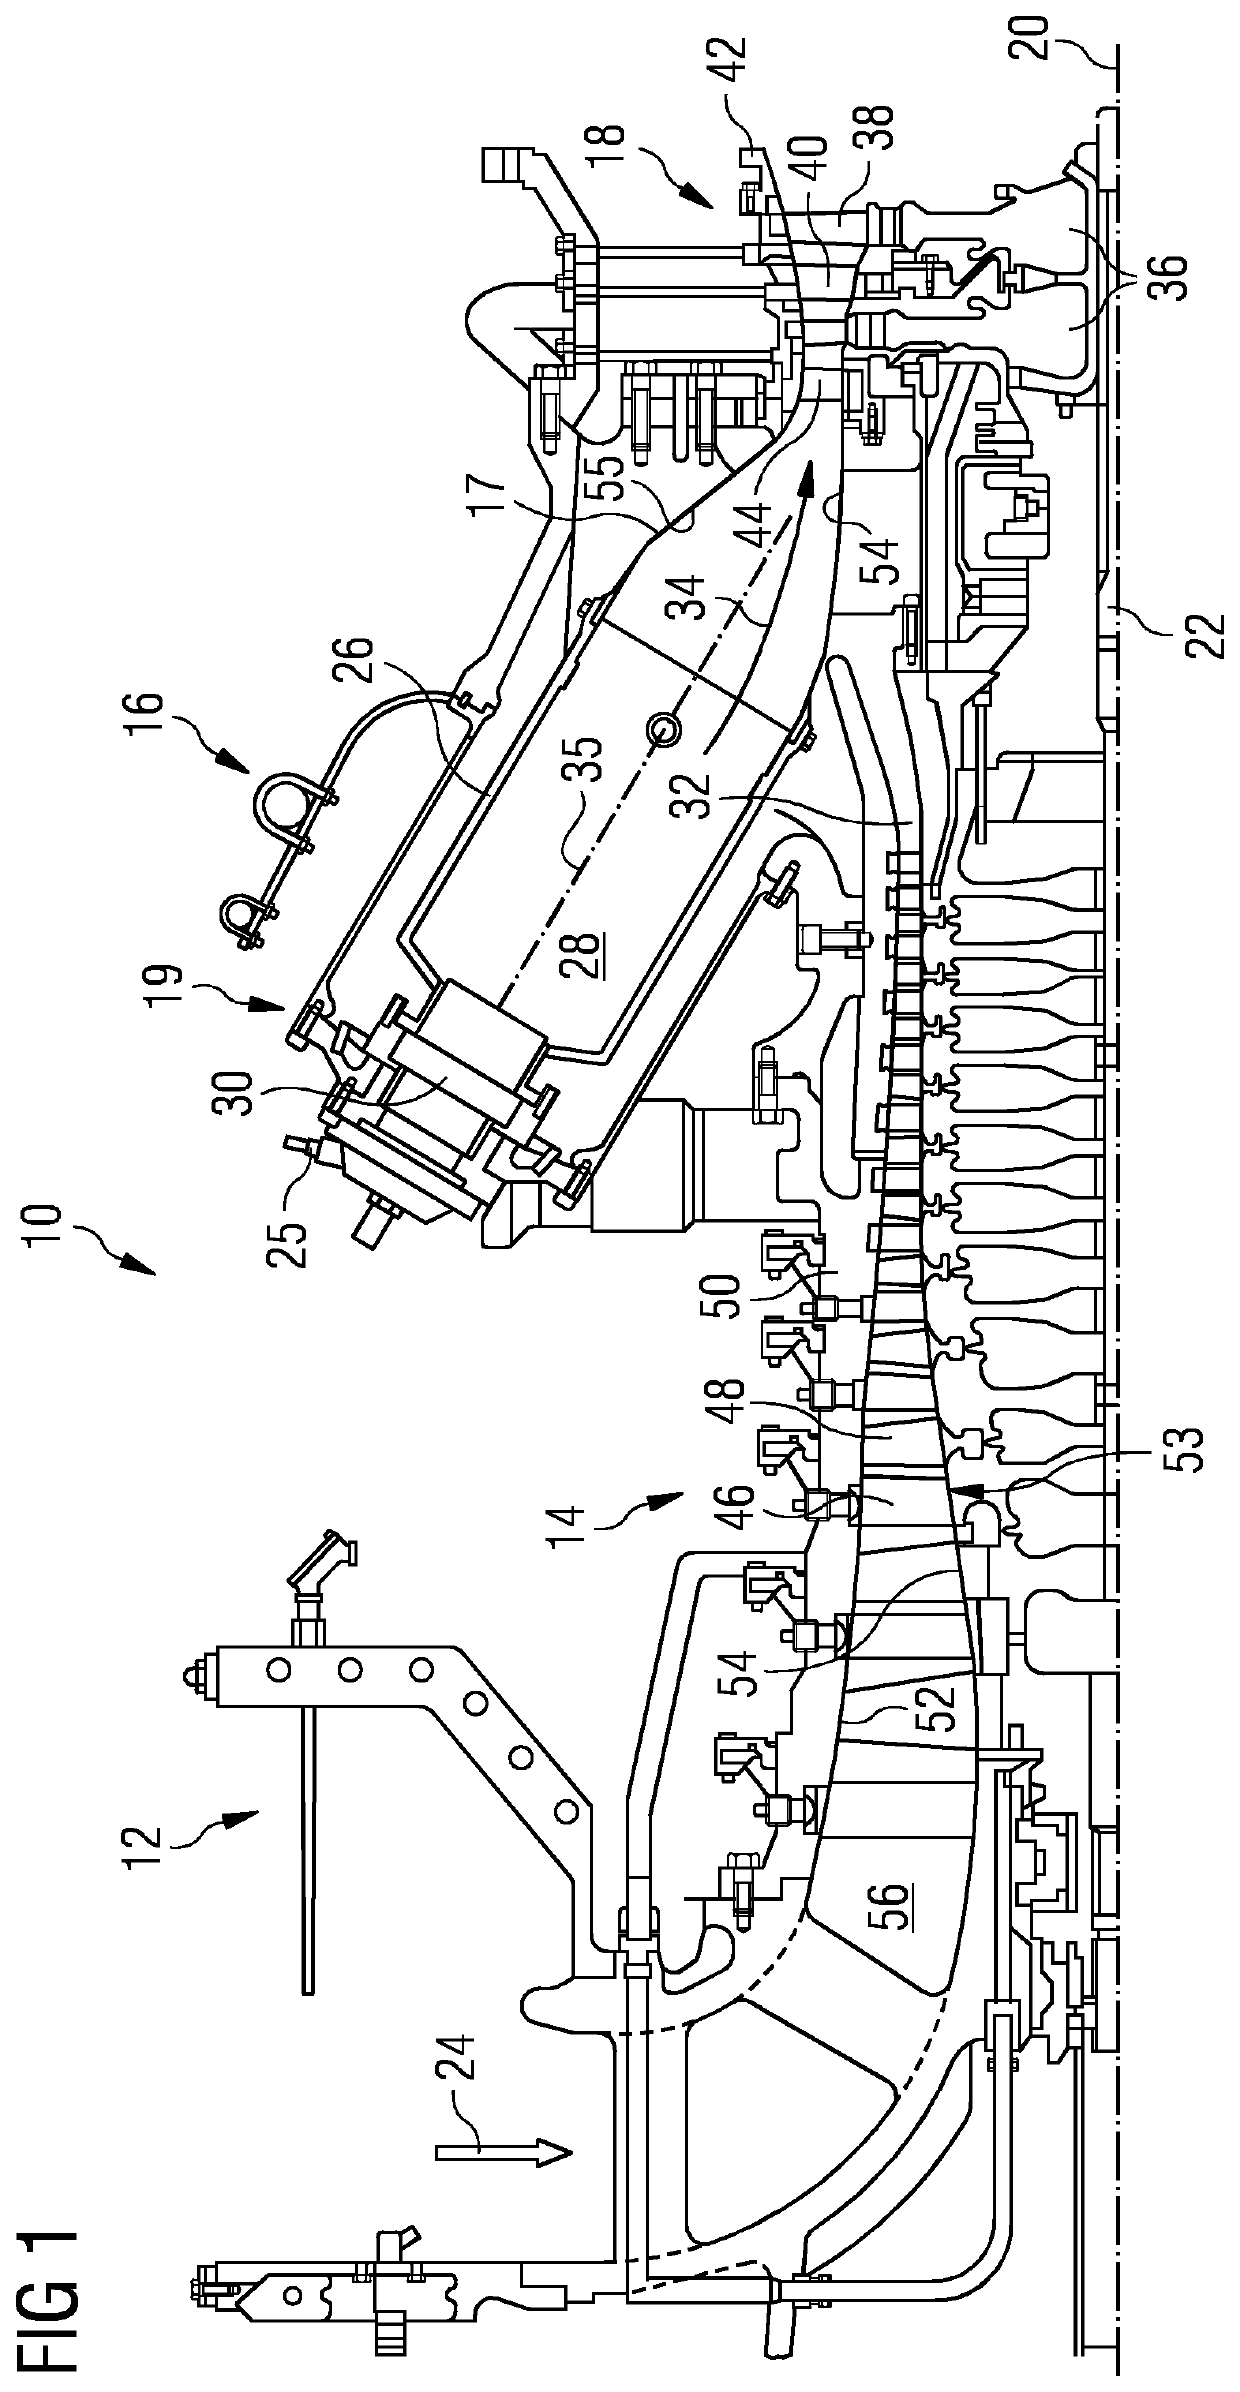 Swirler for mixing fuel with air in a combustion engine